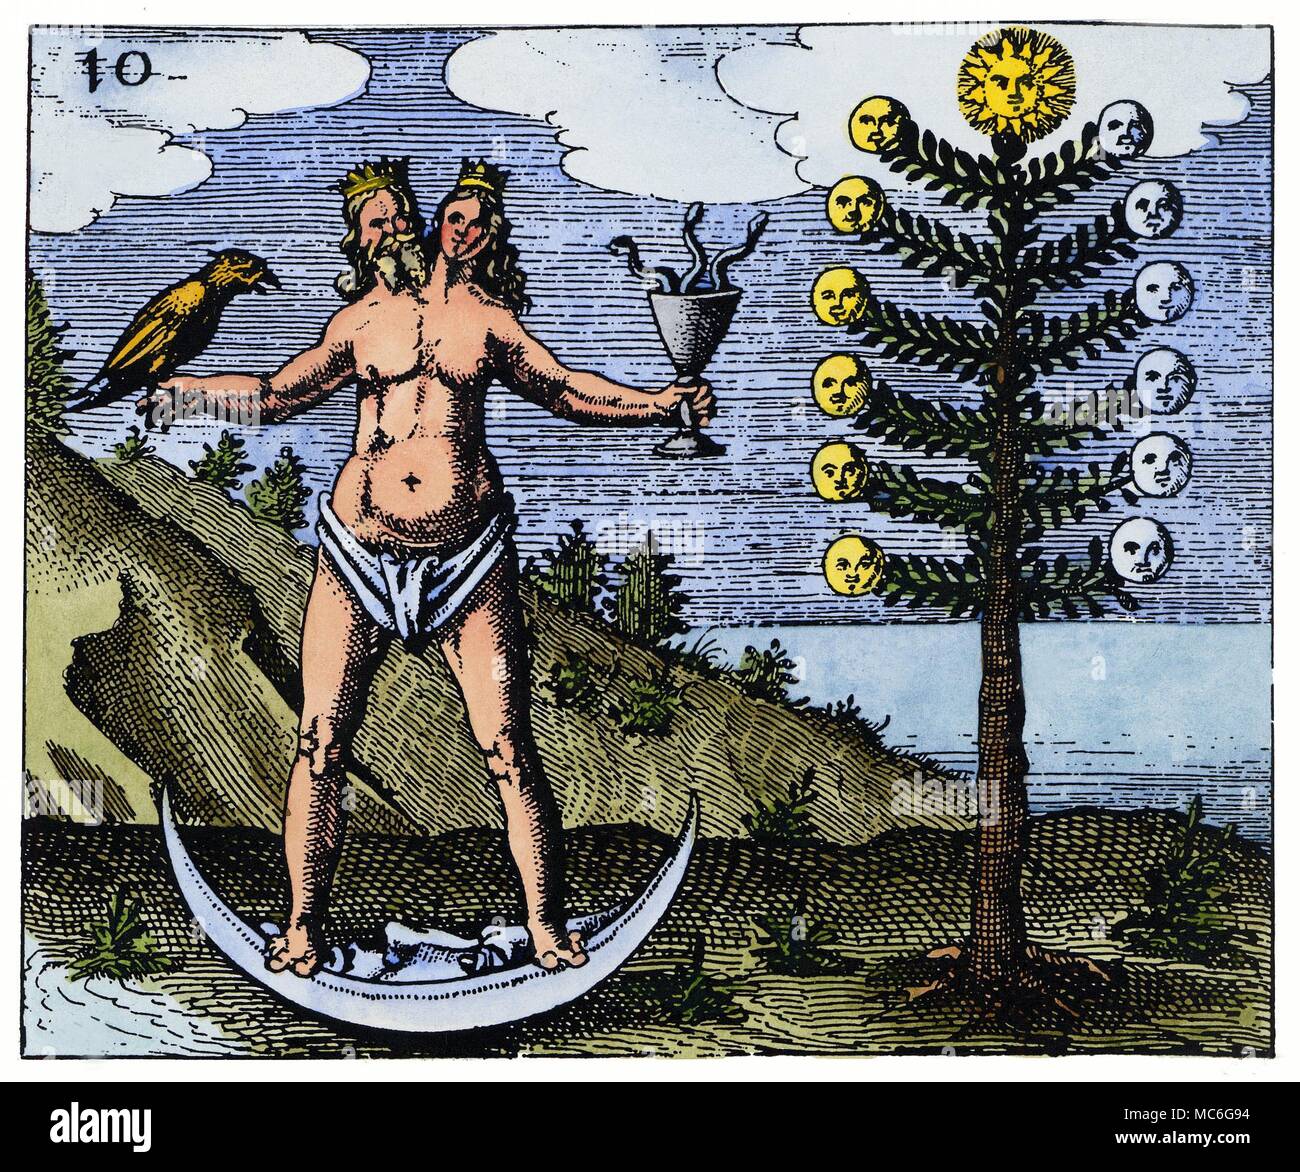 ALCHEMY - TREE OF THE MOON - HERMAPHRODITE Engraving from Johann Daniel Mylius, Philosophia Reformata, 1622. The presence of the Tree of the Moon, or the Arbor Argentum, along with the fact that the hermaphrodite stands on a crescent Moon, indicates that this stage is the alchemical process marking the perfection of the First Silver. The hermaphroditic merging of the King and Queen indicates that the process is not yet complete, as integration has not taken place. Stock Photo